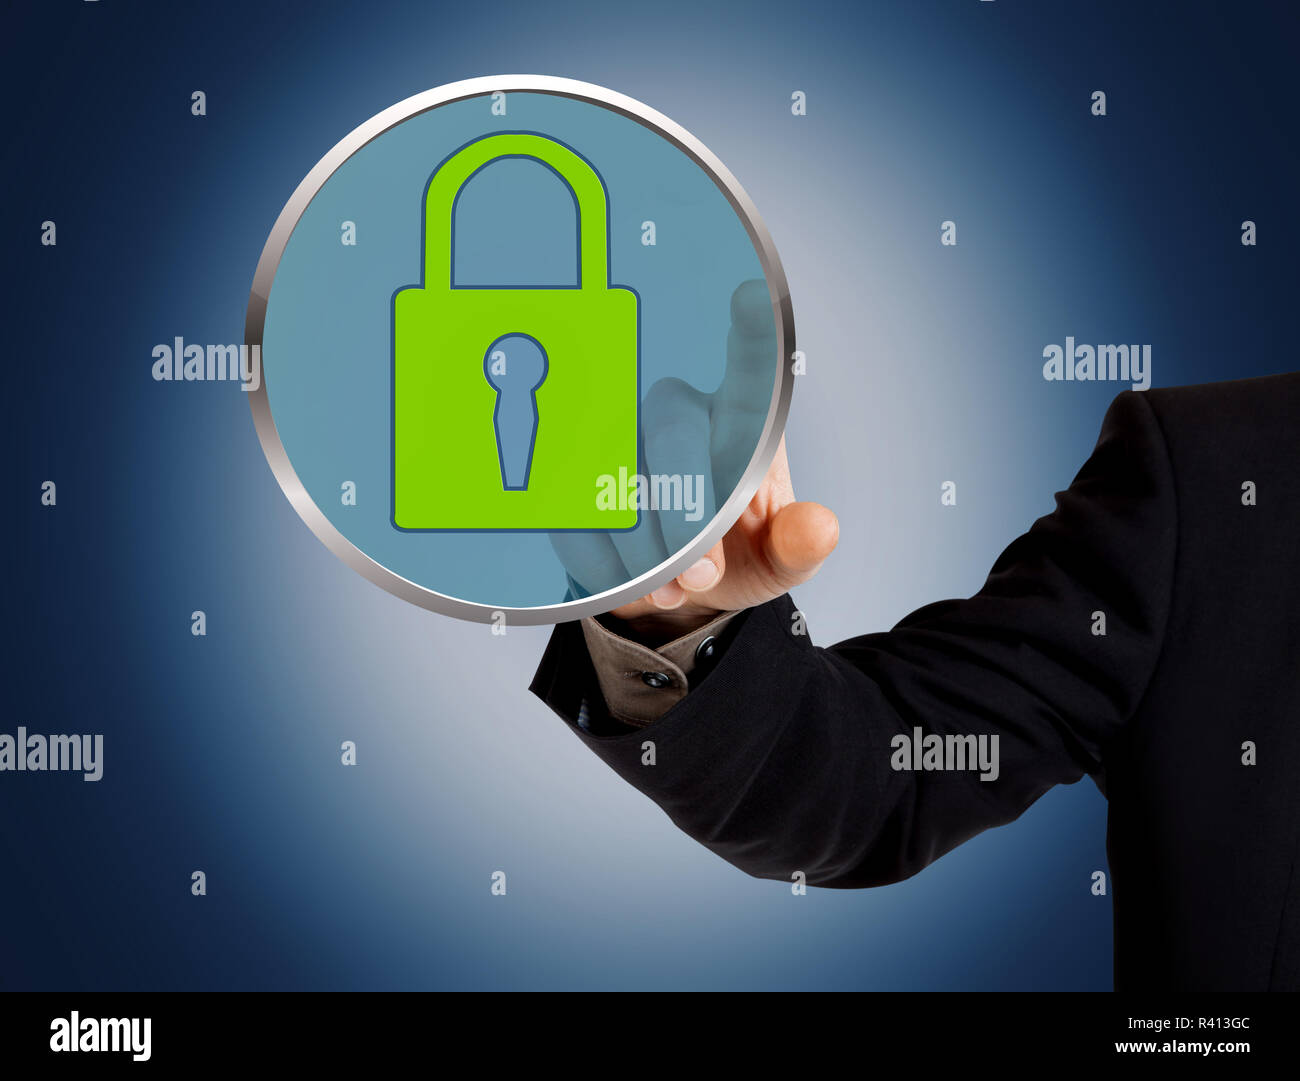 Hand pushing virtual security button Stock Photo